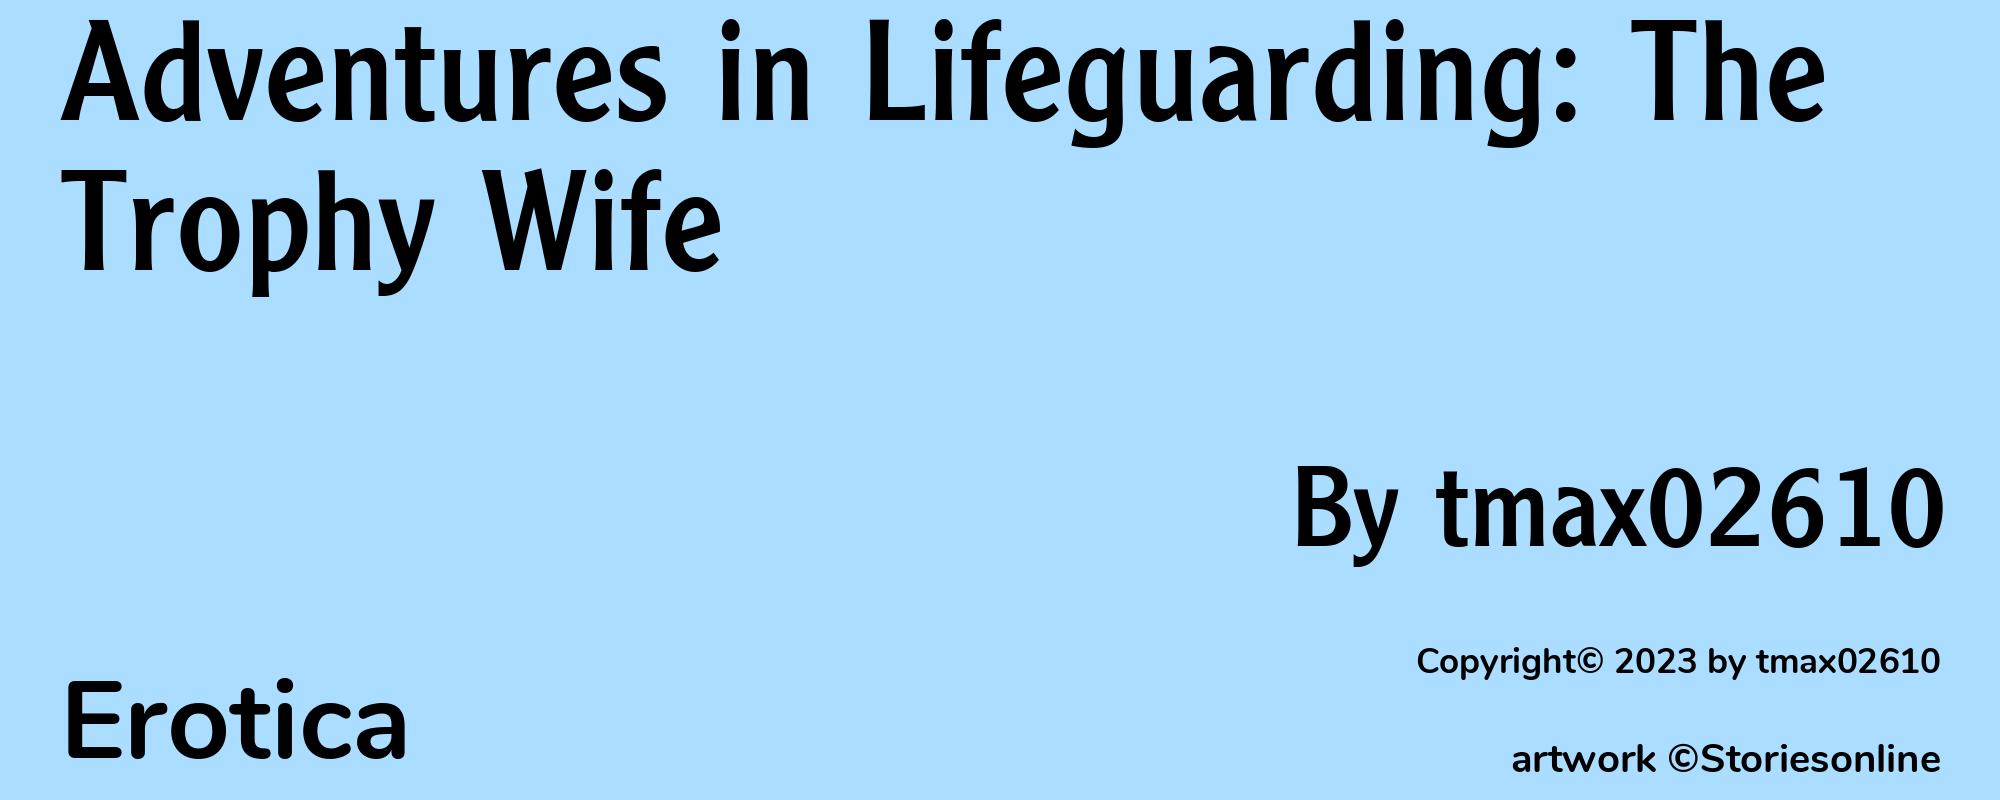 Adventures in Lifeguarding: The Trophy Wife - Cover